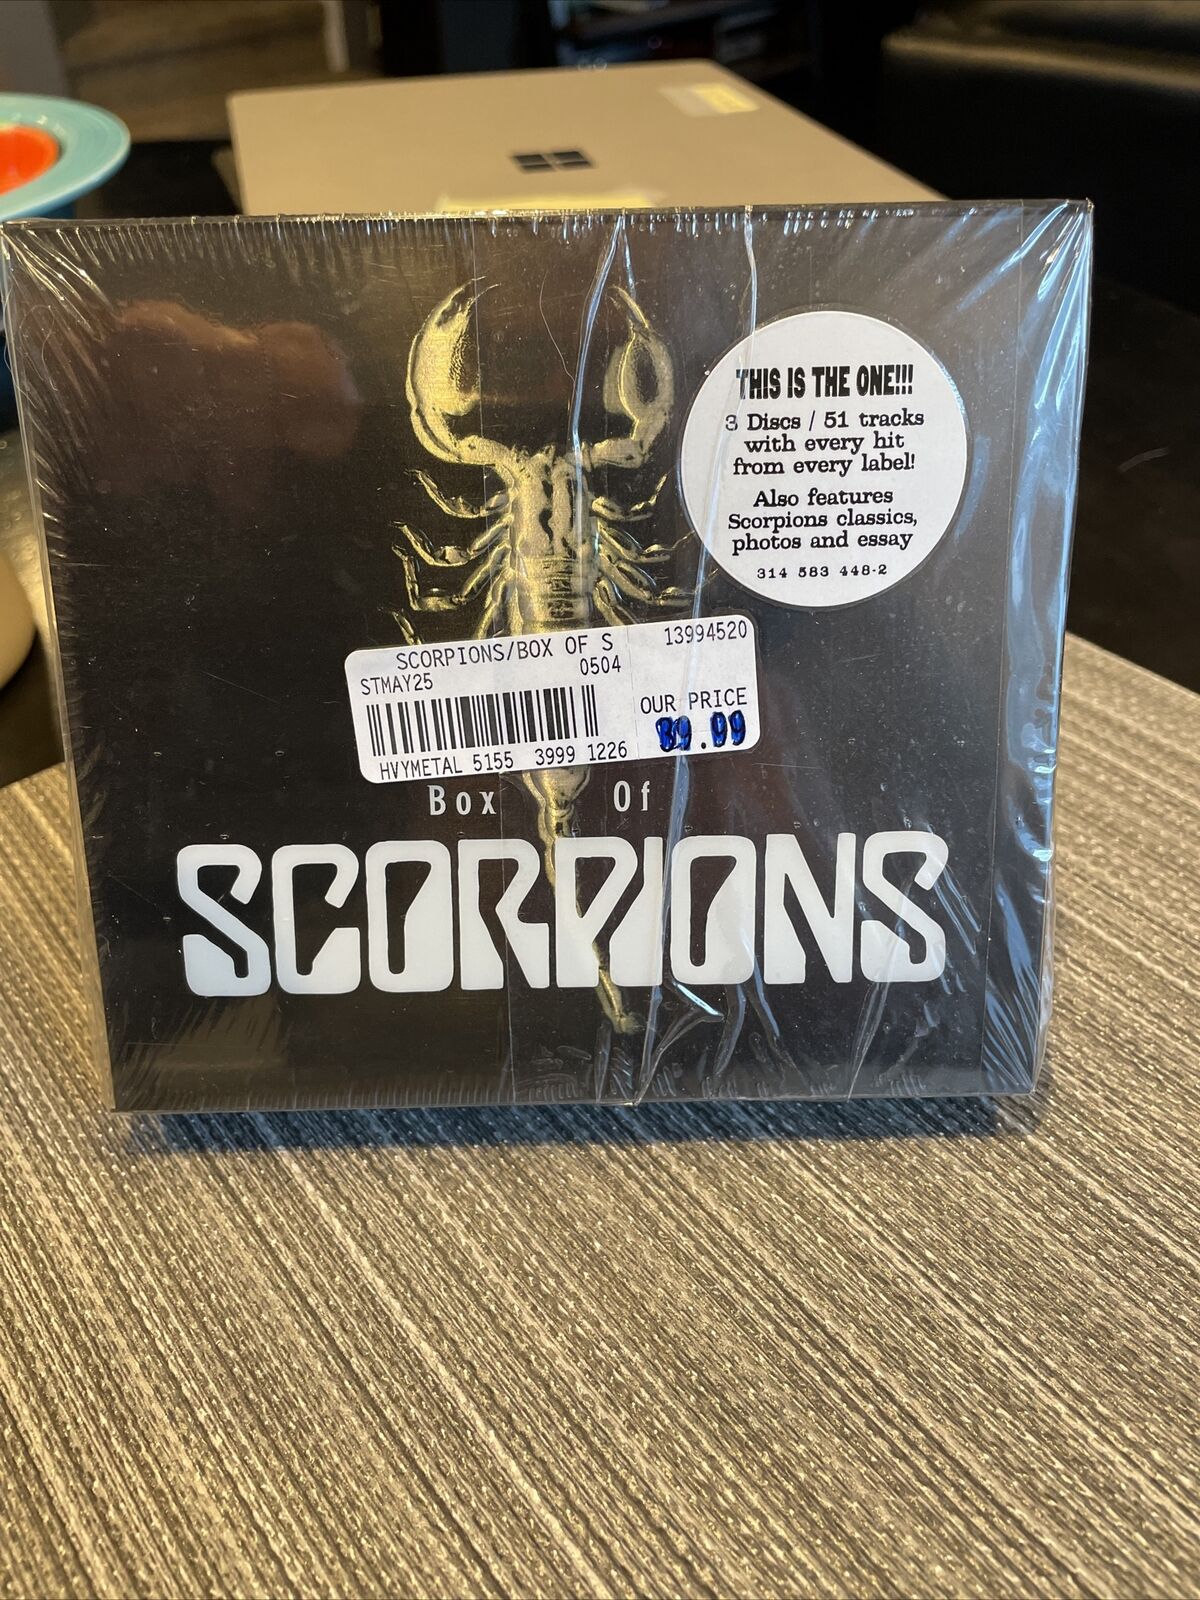 Box of Scorpions CD SEALED NEW 3 Discs Universal Music OOP RARE GREAT PRICE